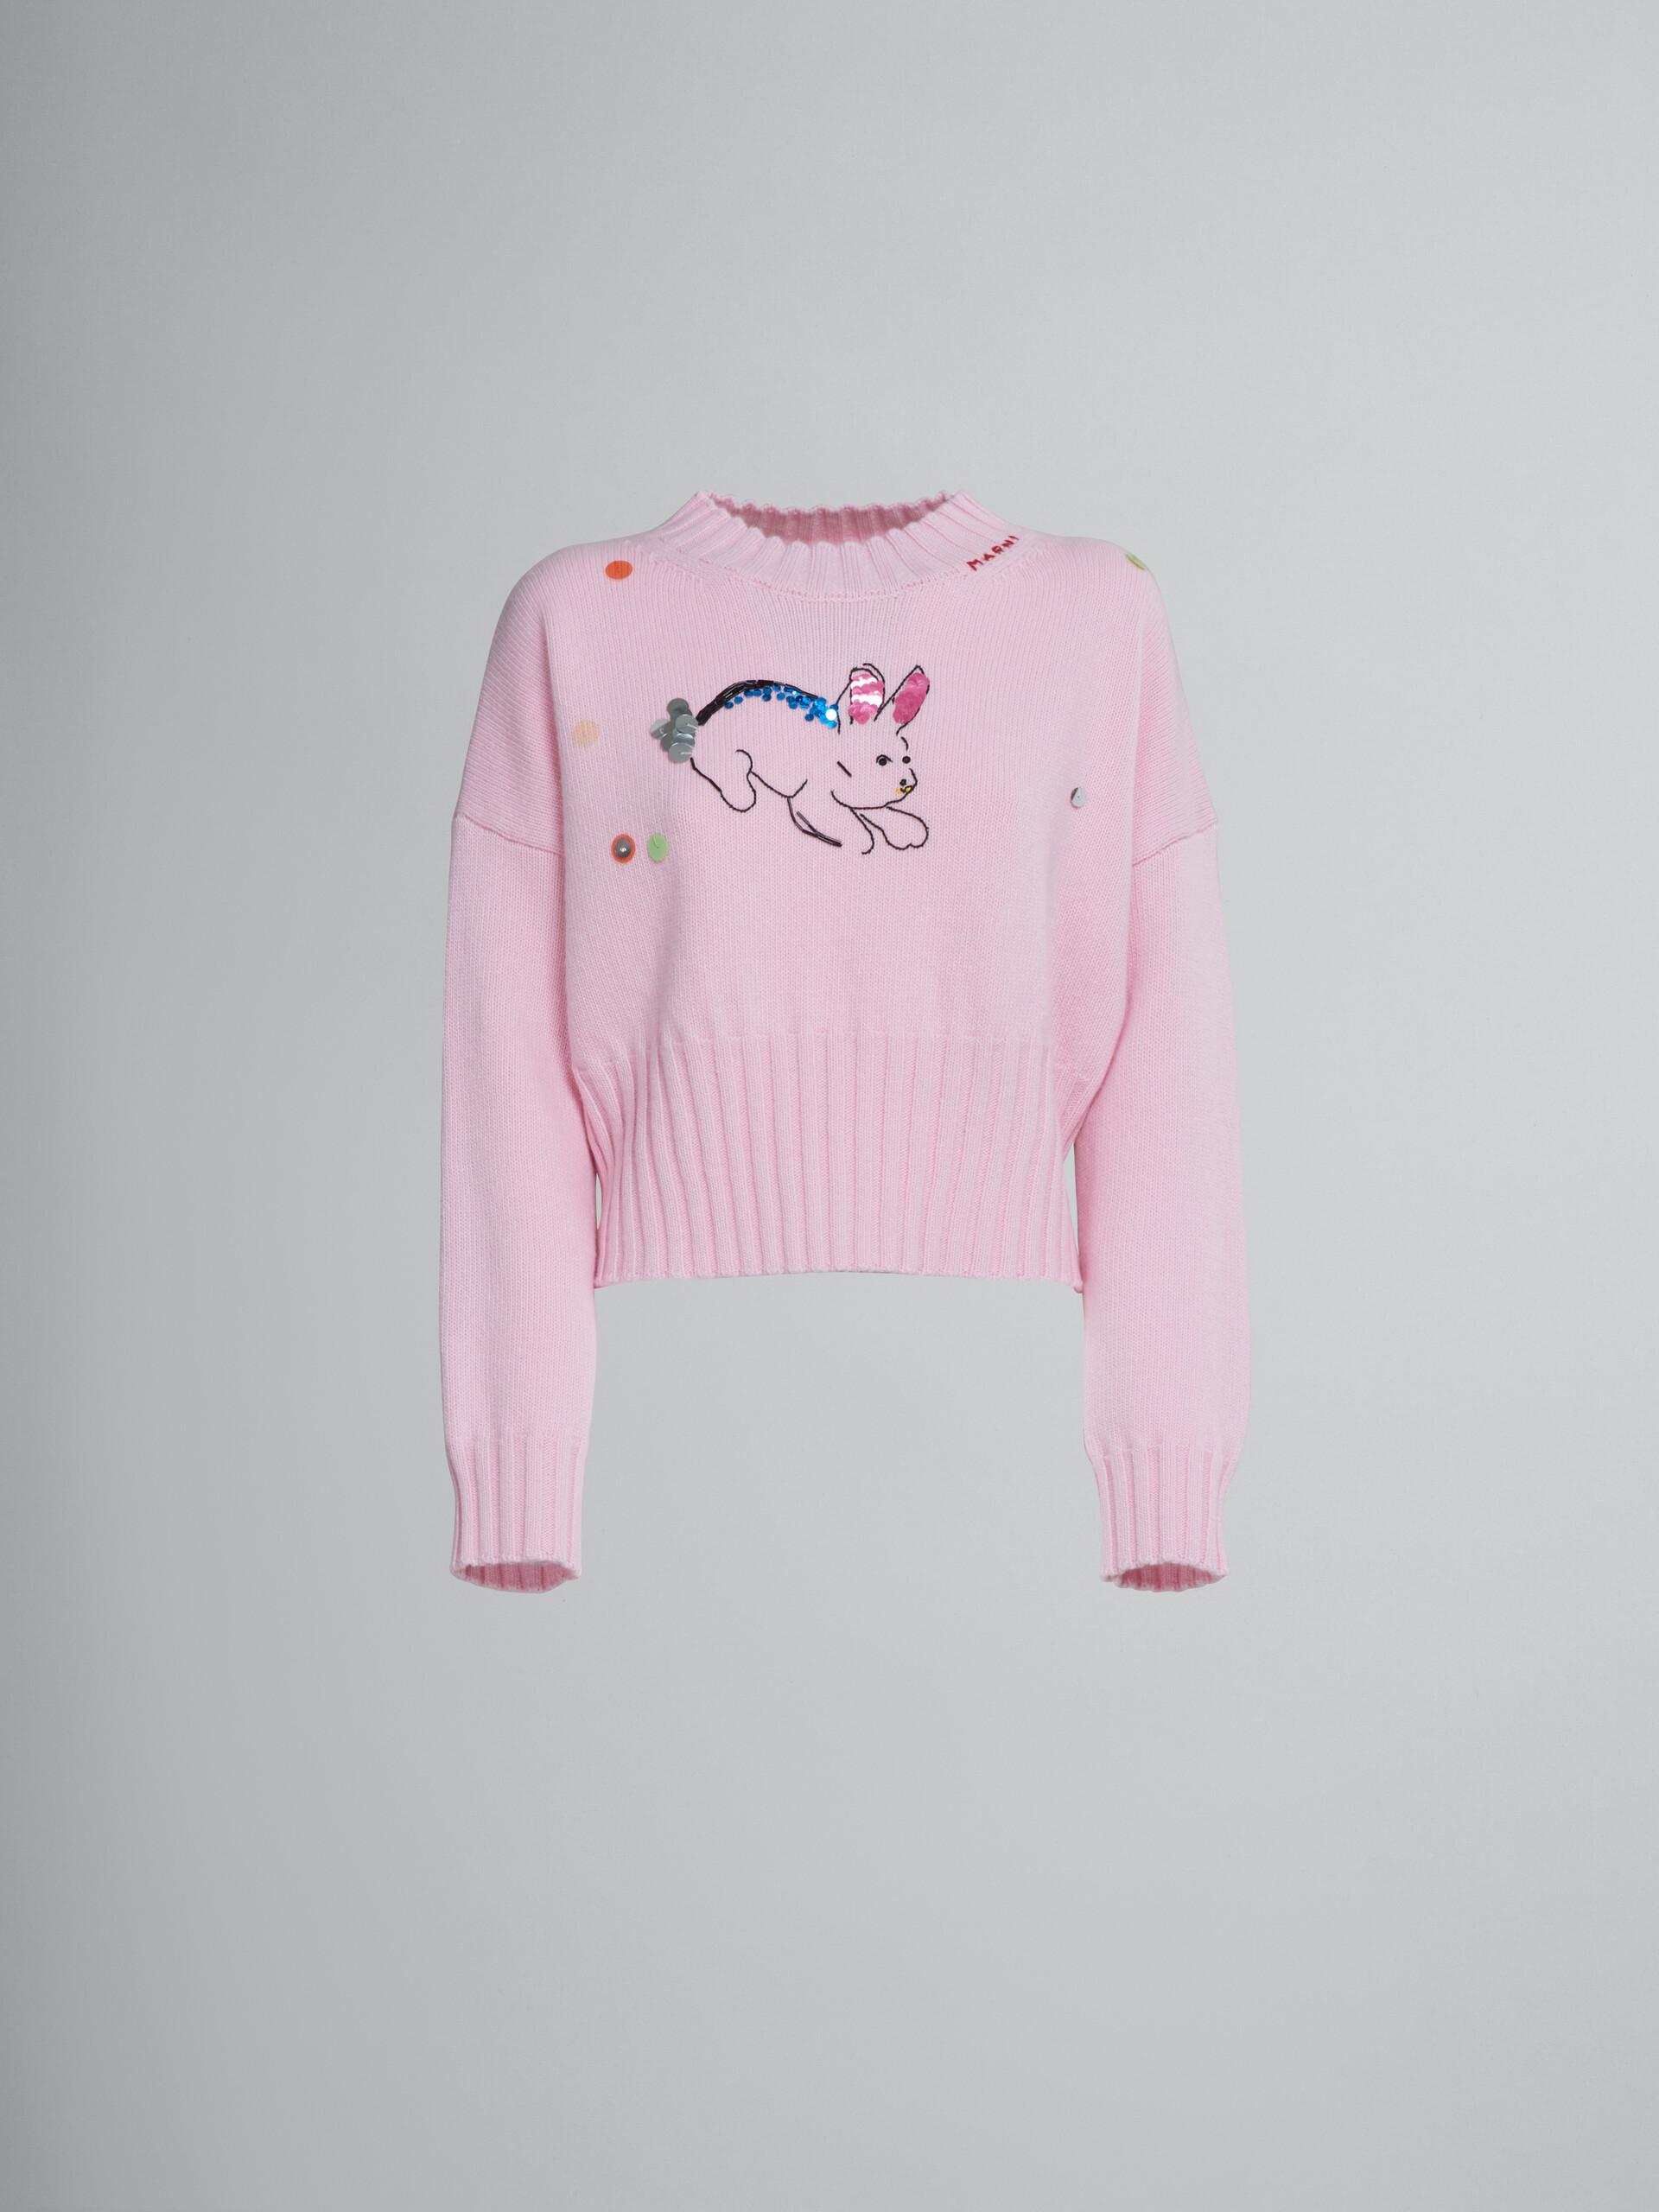 Sweater with rabbit embroidery - Pullovers - Image 1